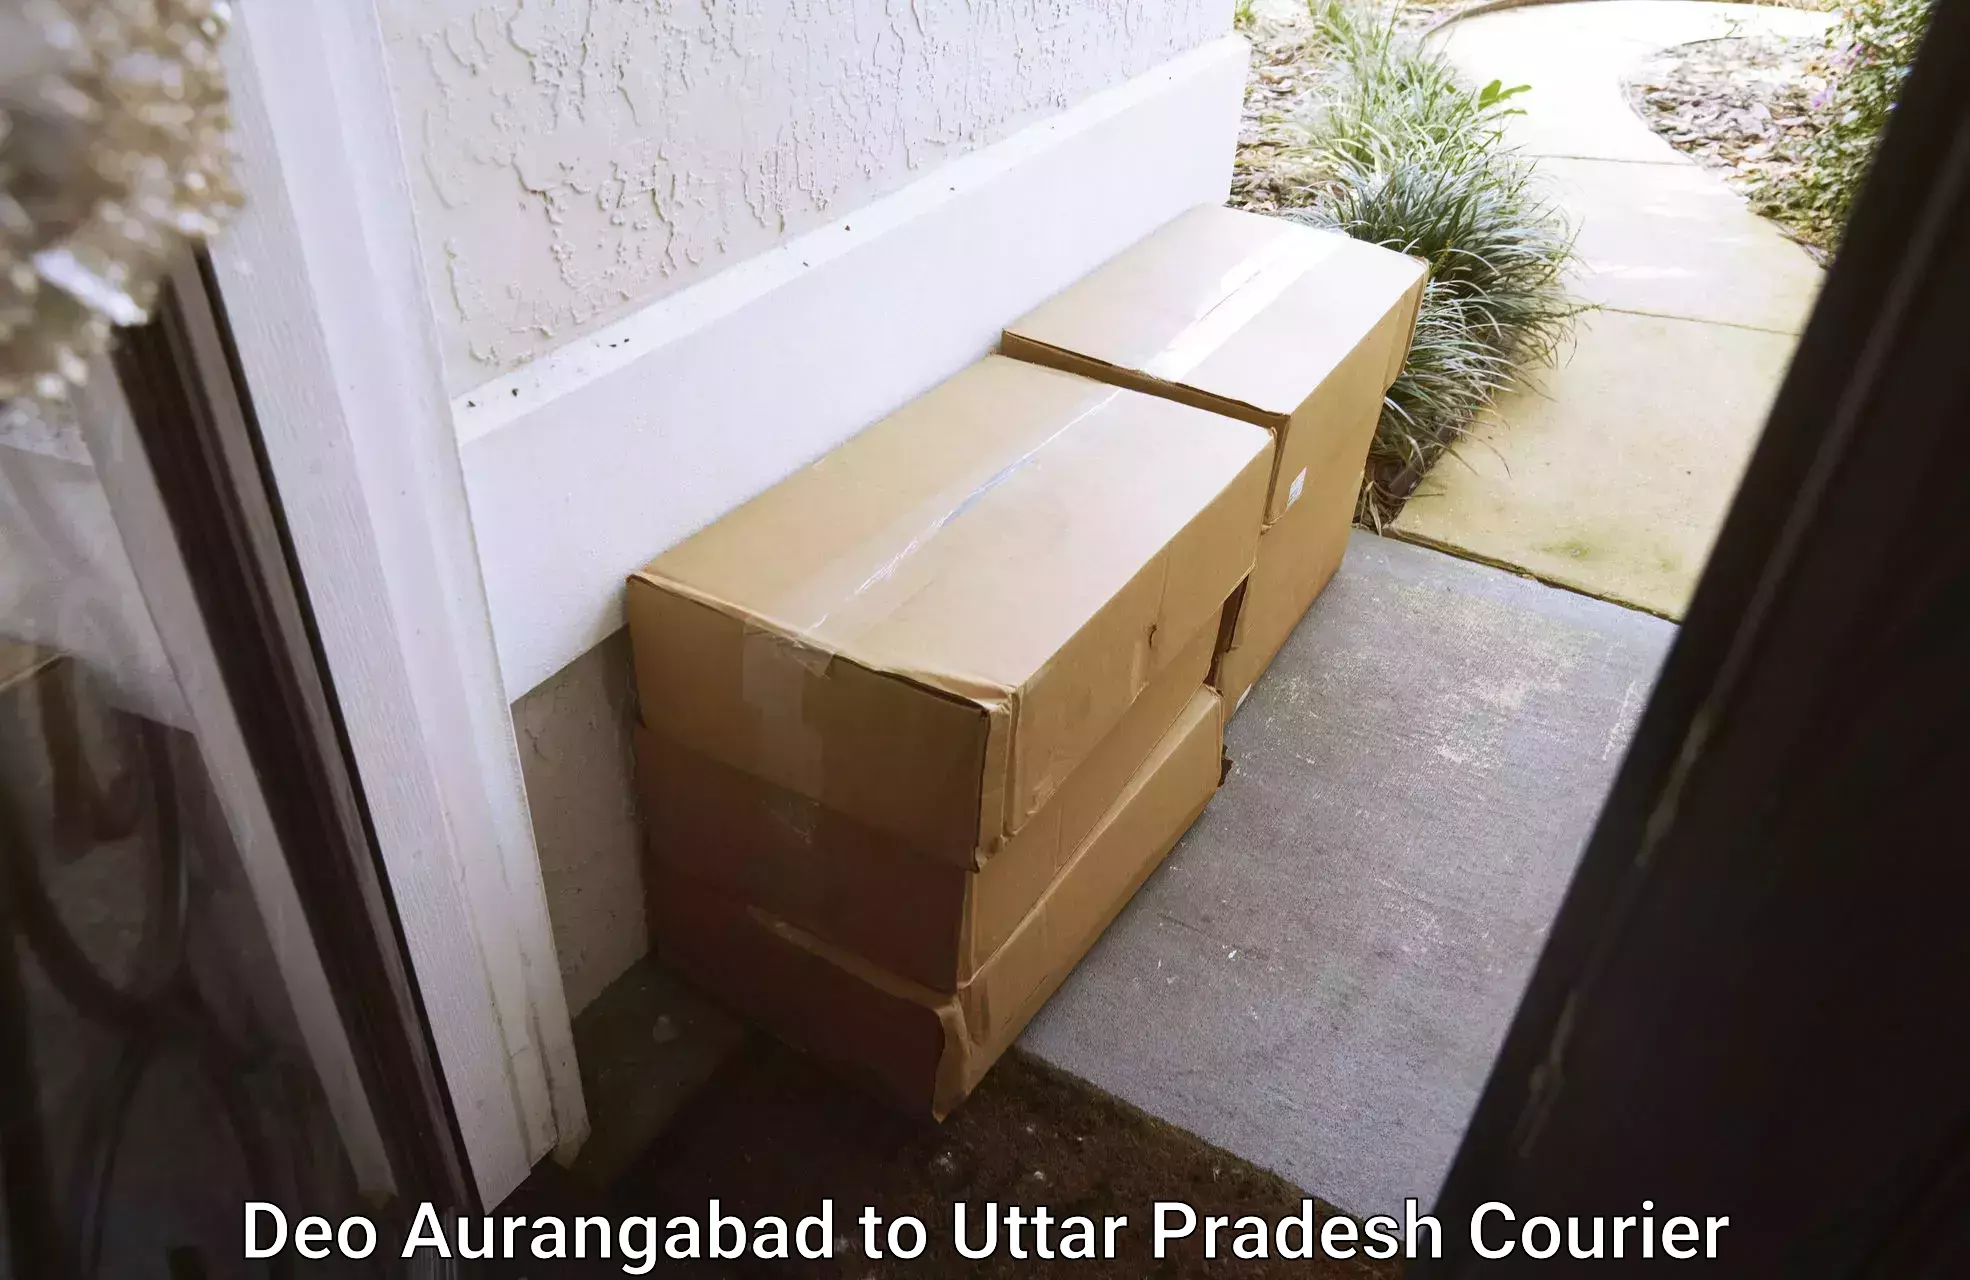 Professional relocation services Deo Aurangabad to Pilibhit